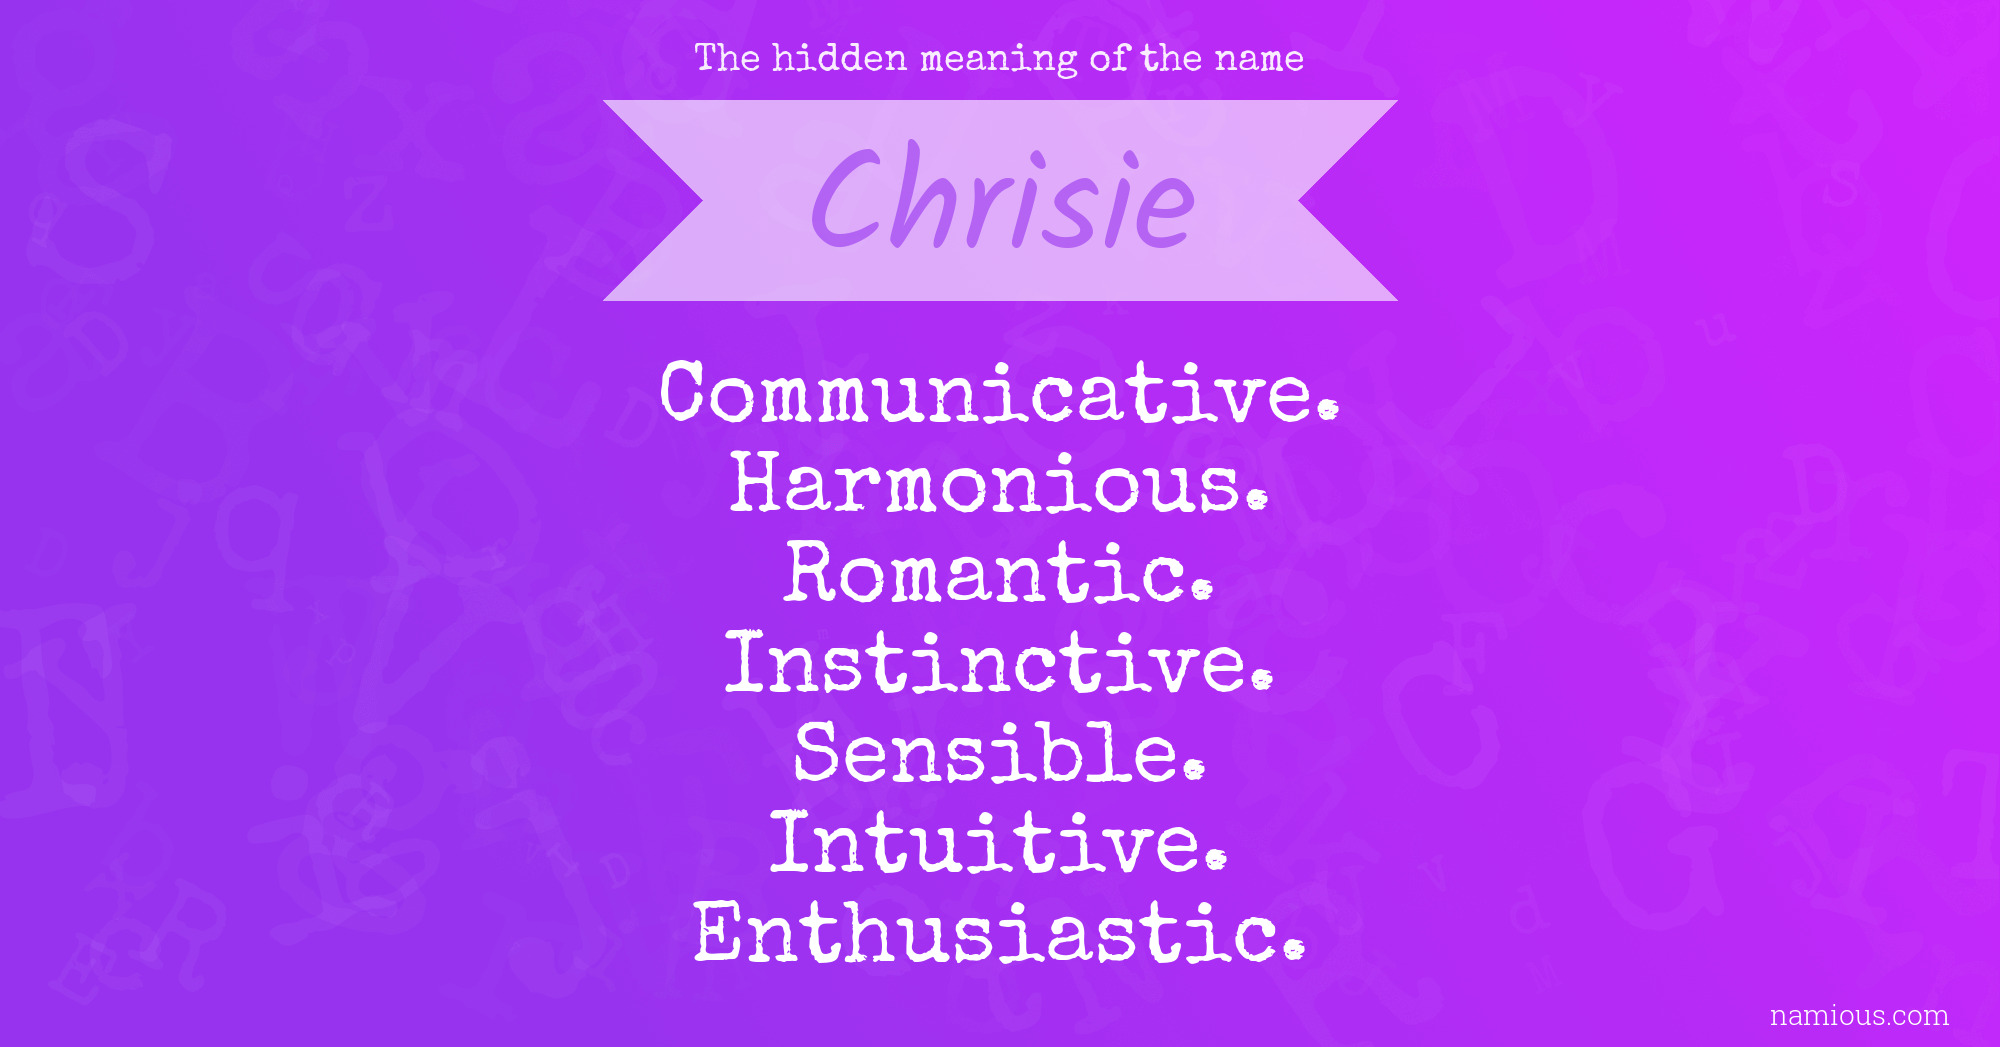 The hidden meaning of the name Chrisie